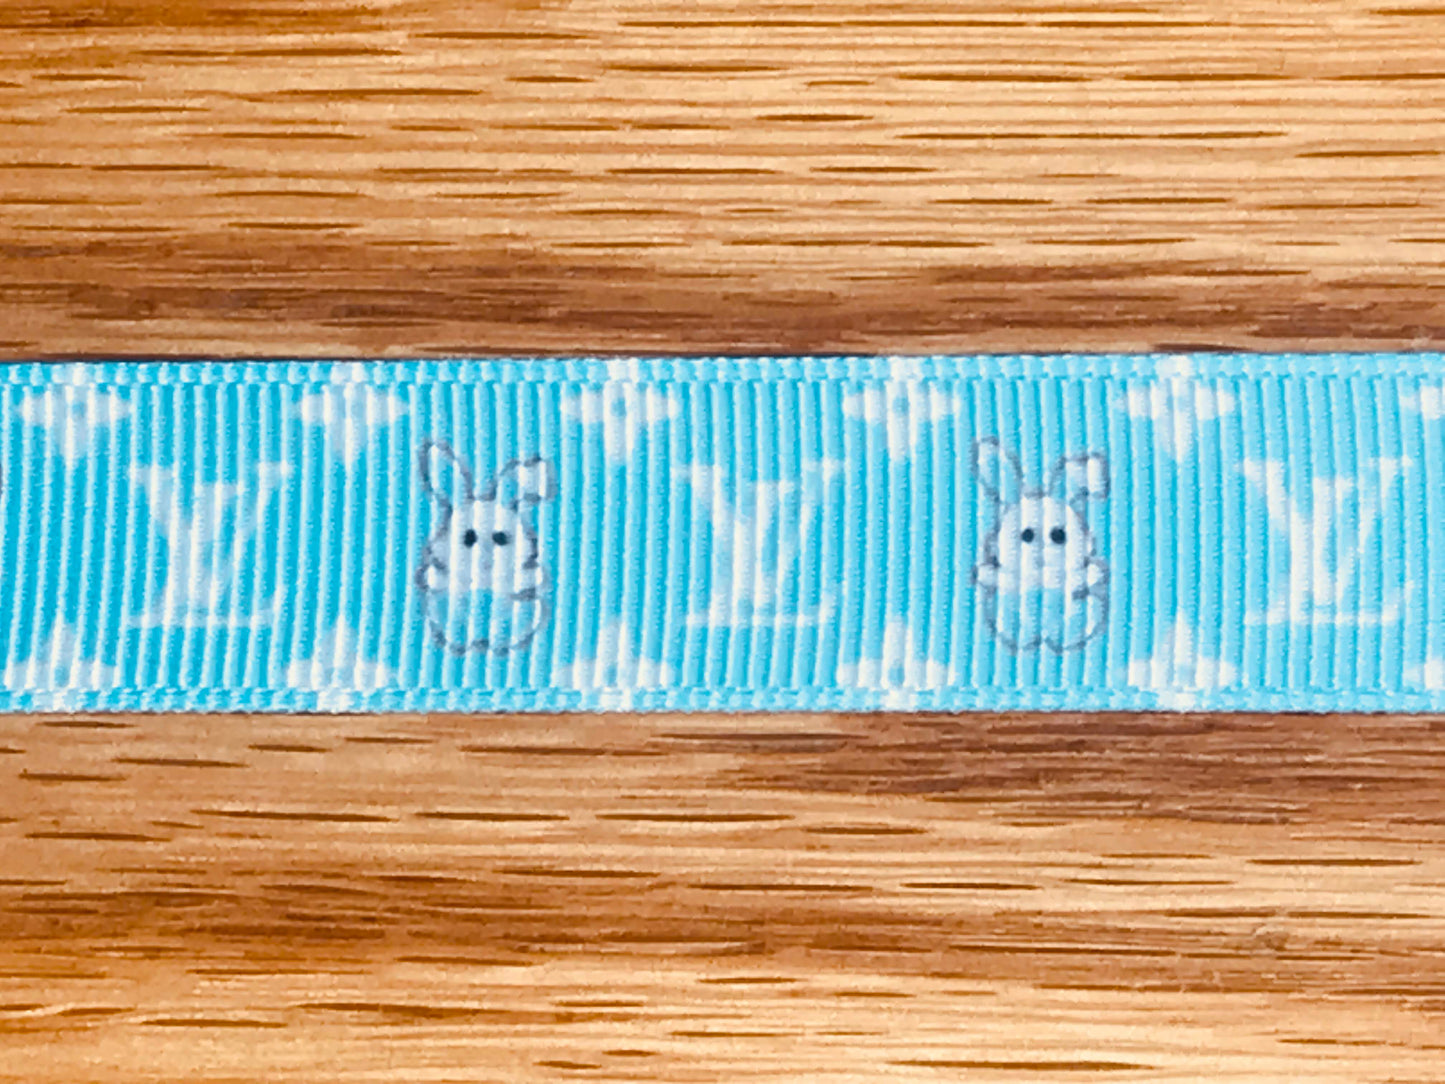 5/8" Wide Famous Designer LV Louis Vuitton Logo With Easter Bunny Rabbits On Blue Grosgrain Ribbon